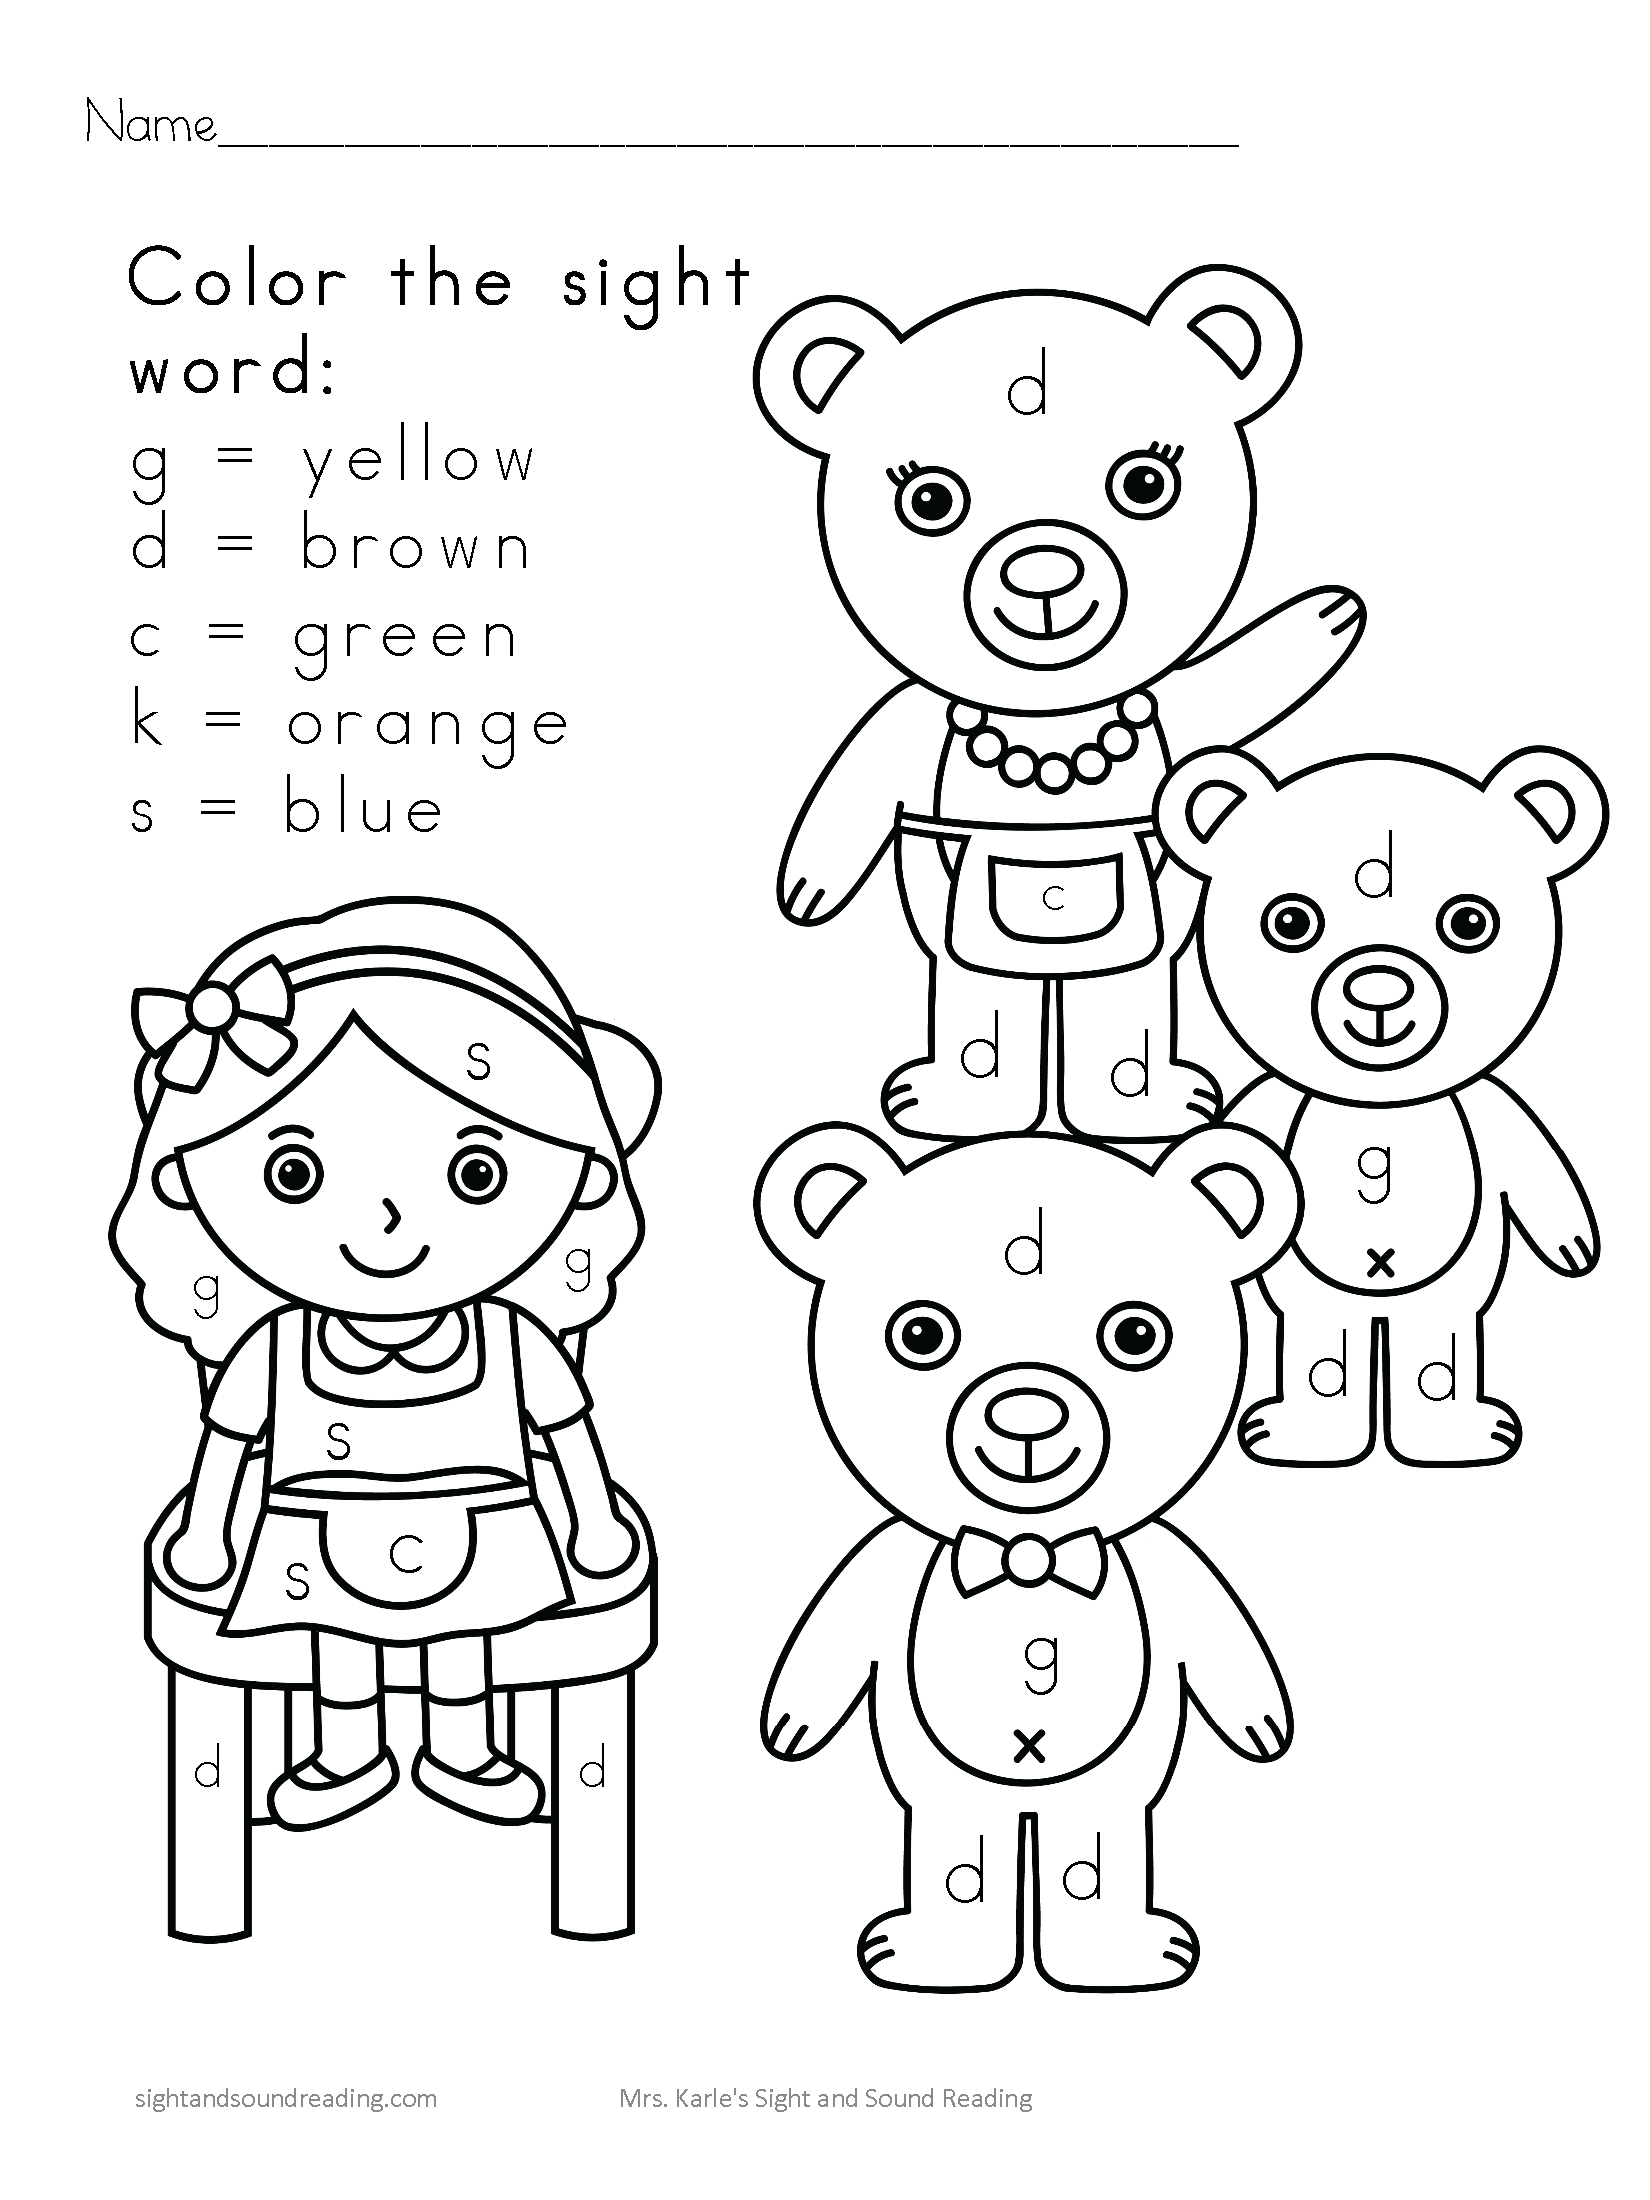 goldilocks-and-the-three-bears-pictures-to-colour